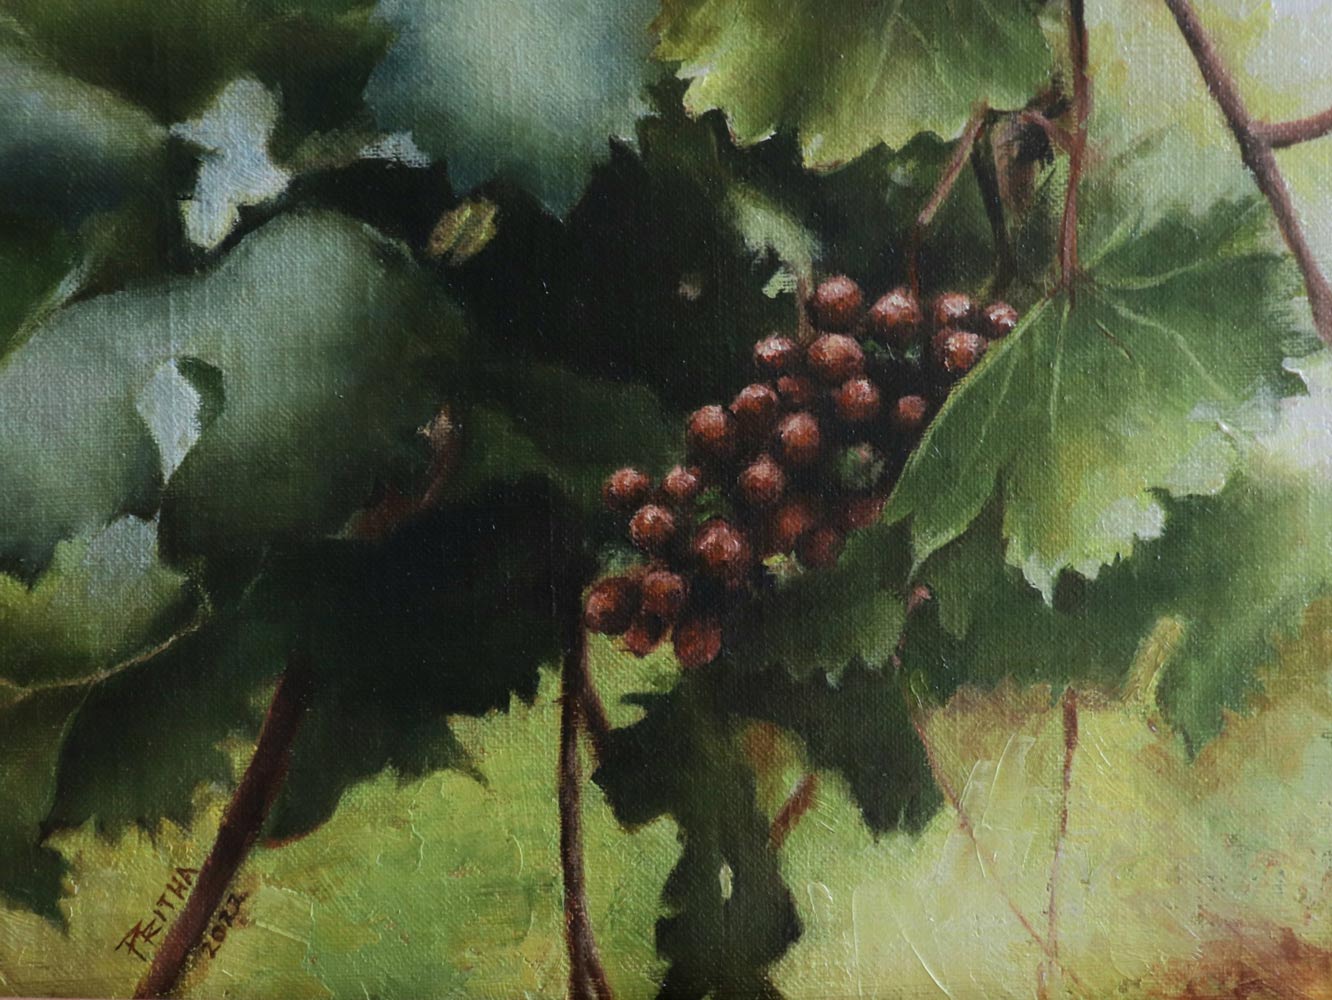 Buy painting online Singapore Exquisite Art Pritha Bhadra Bunch of Grapes